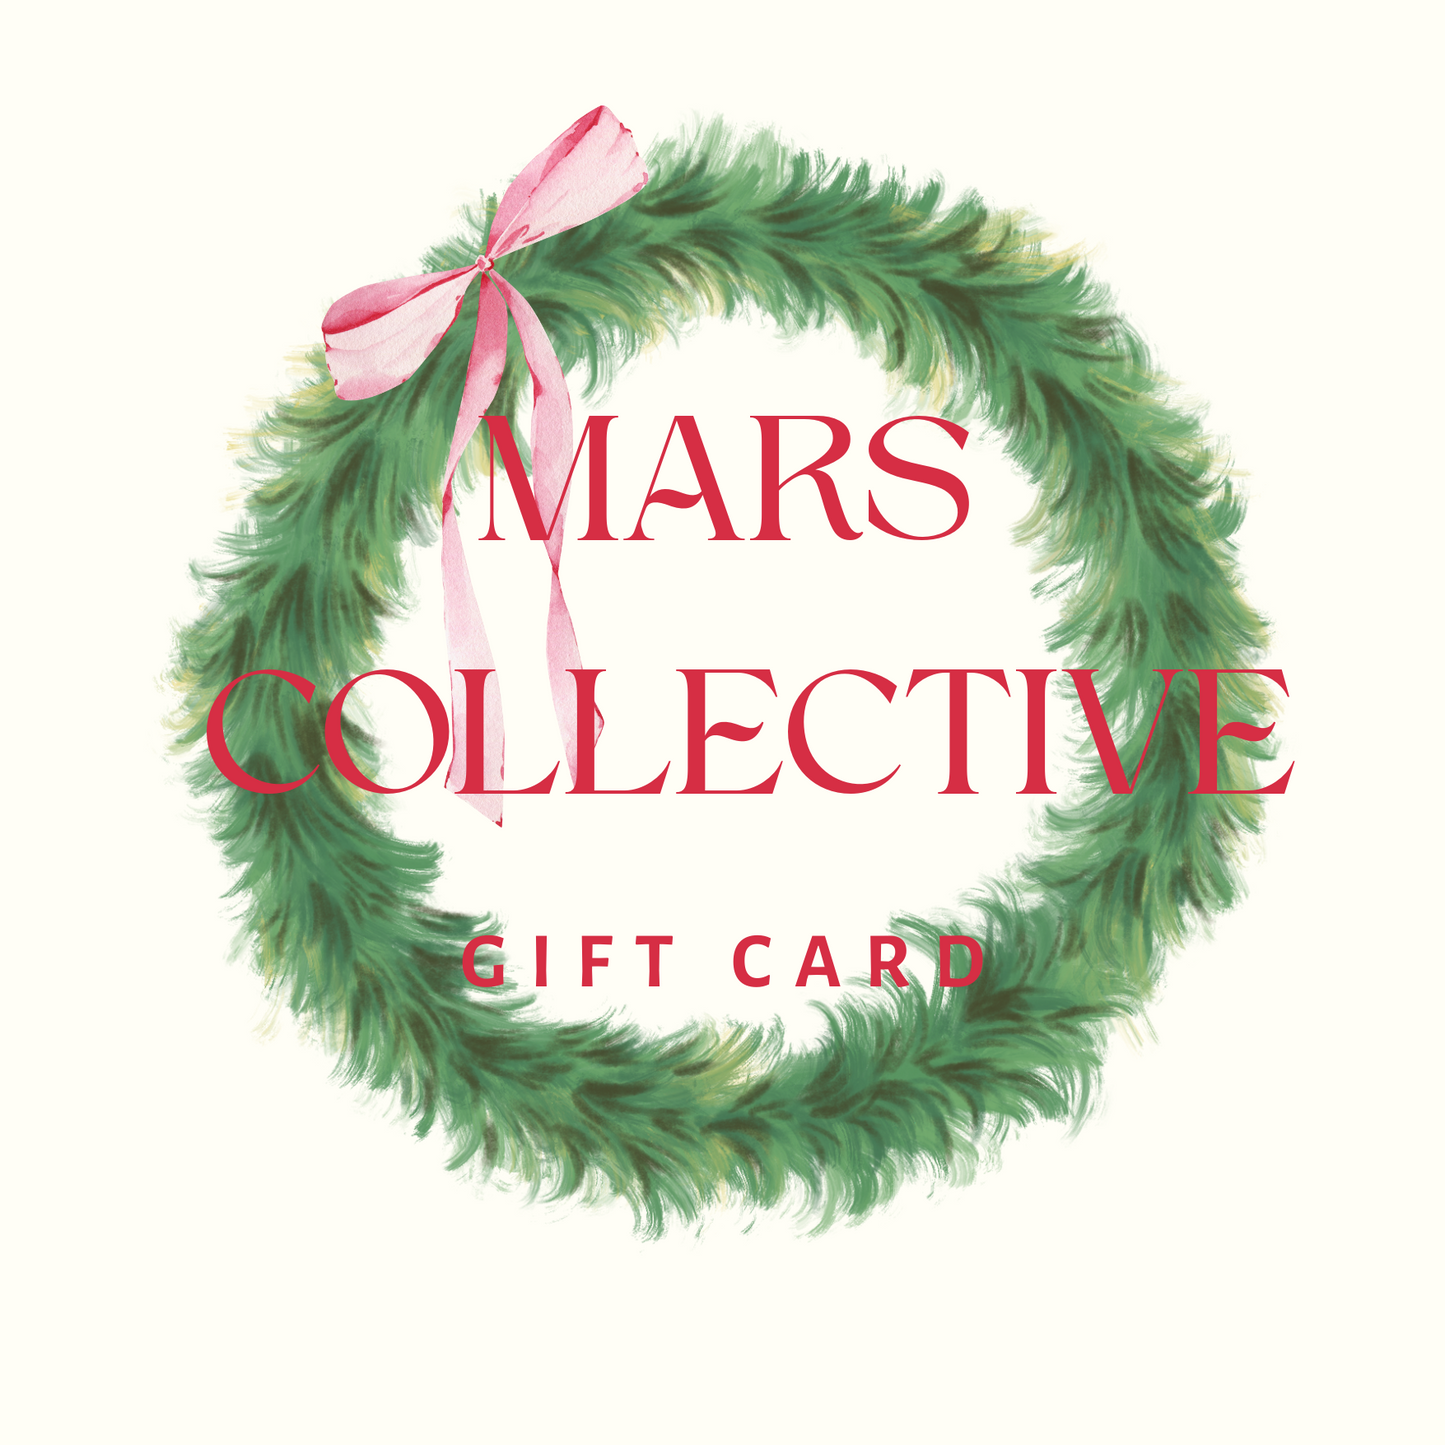 Mars Collective Gift Card